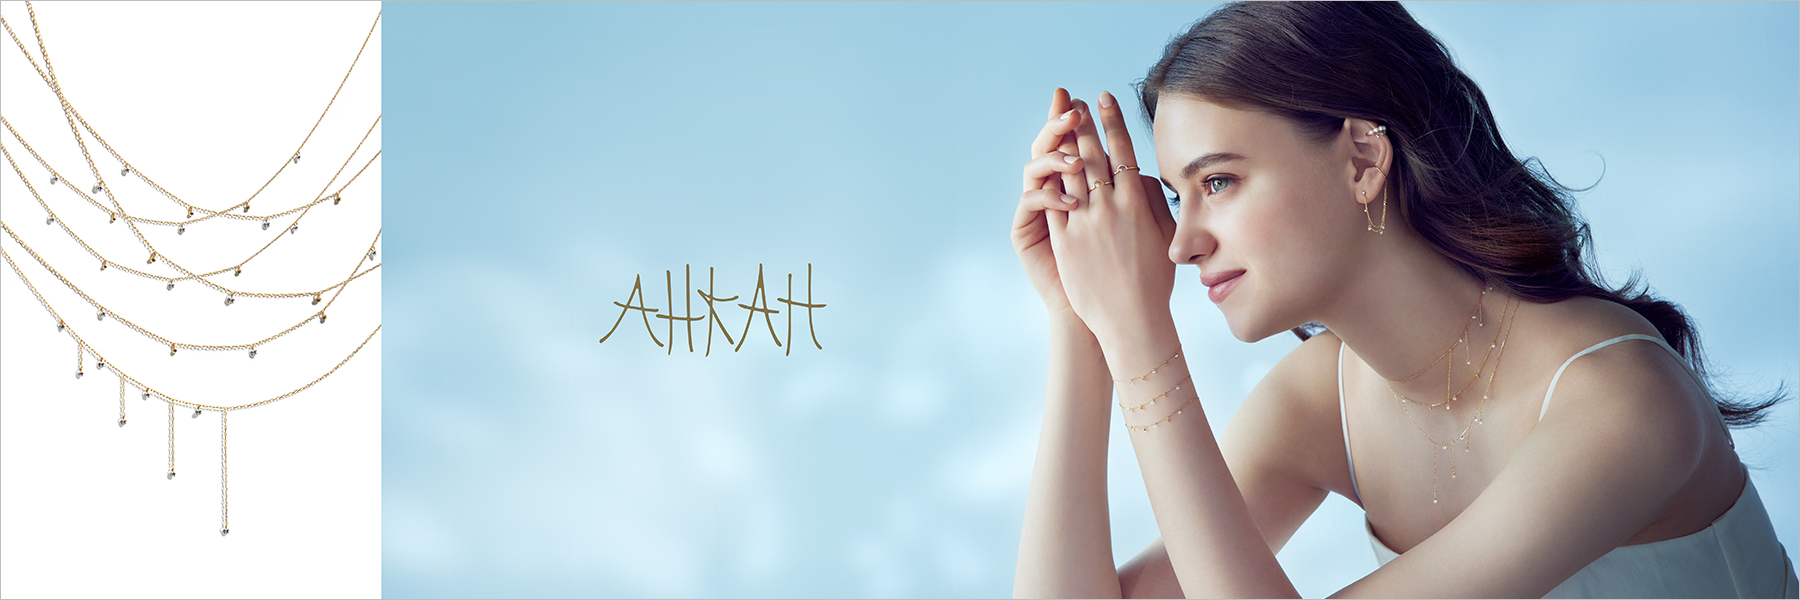 JEWELRY|AHKAH official site